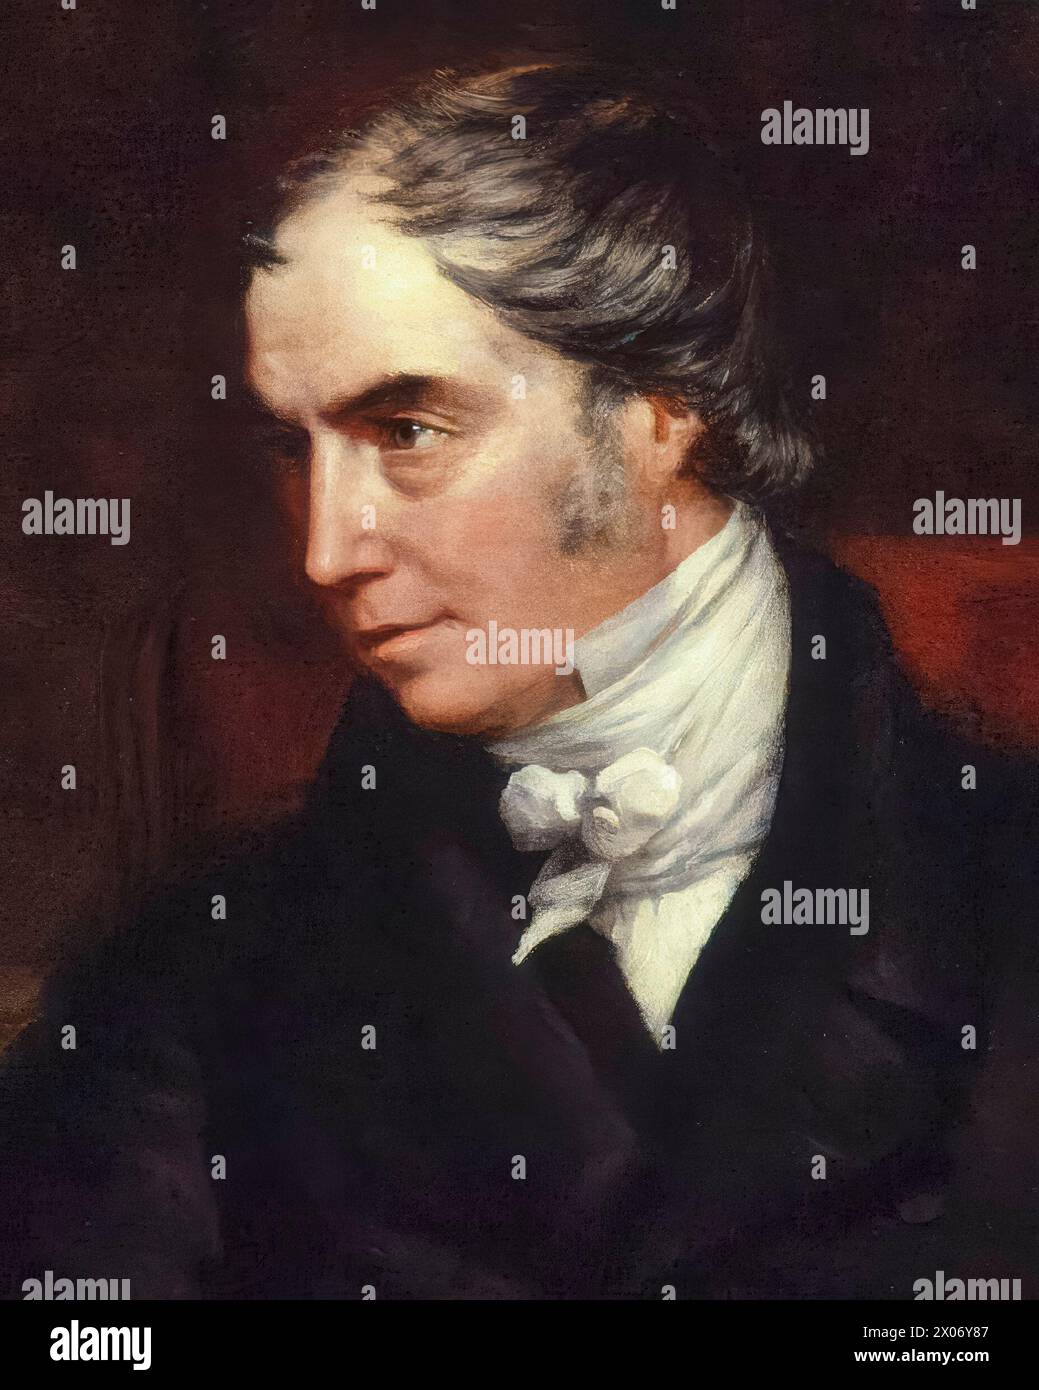 George Hamilton-Gordon, 4th Earl of Aberdeen (1784-1860), styled 'Lord Haddo', Prime Minister of the United Kingdom 1852-1855, portrait painting in oil on canvas by John Partridge, circa 1847 Stock Photo